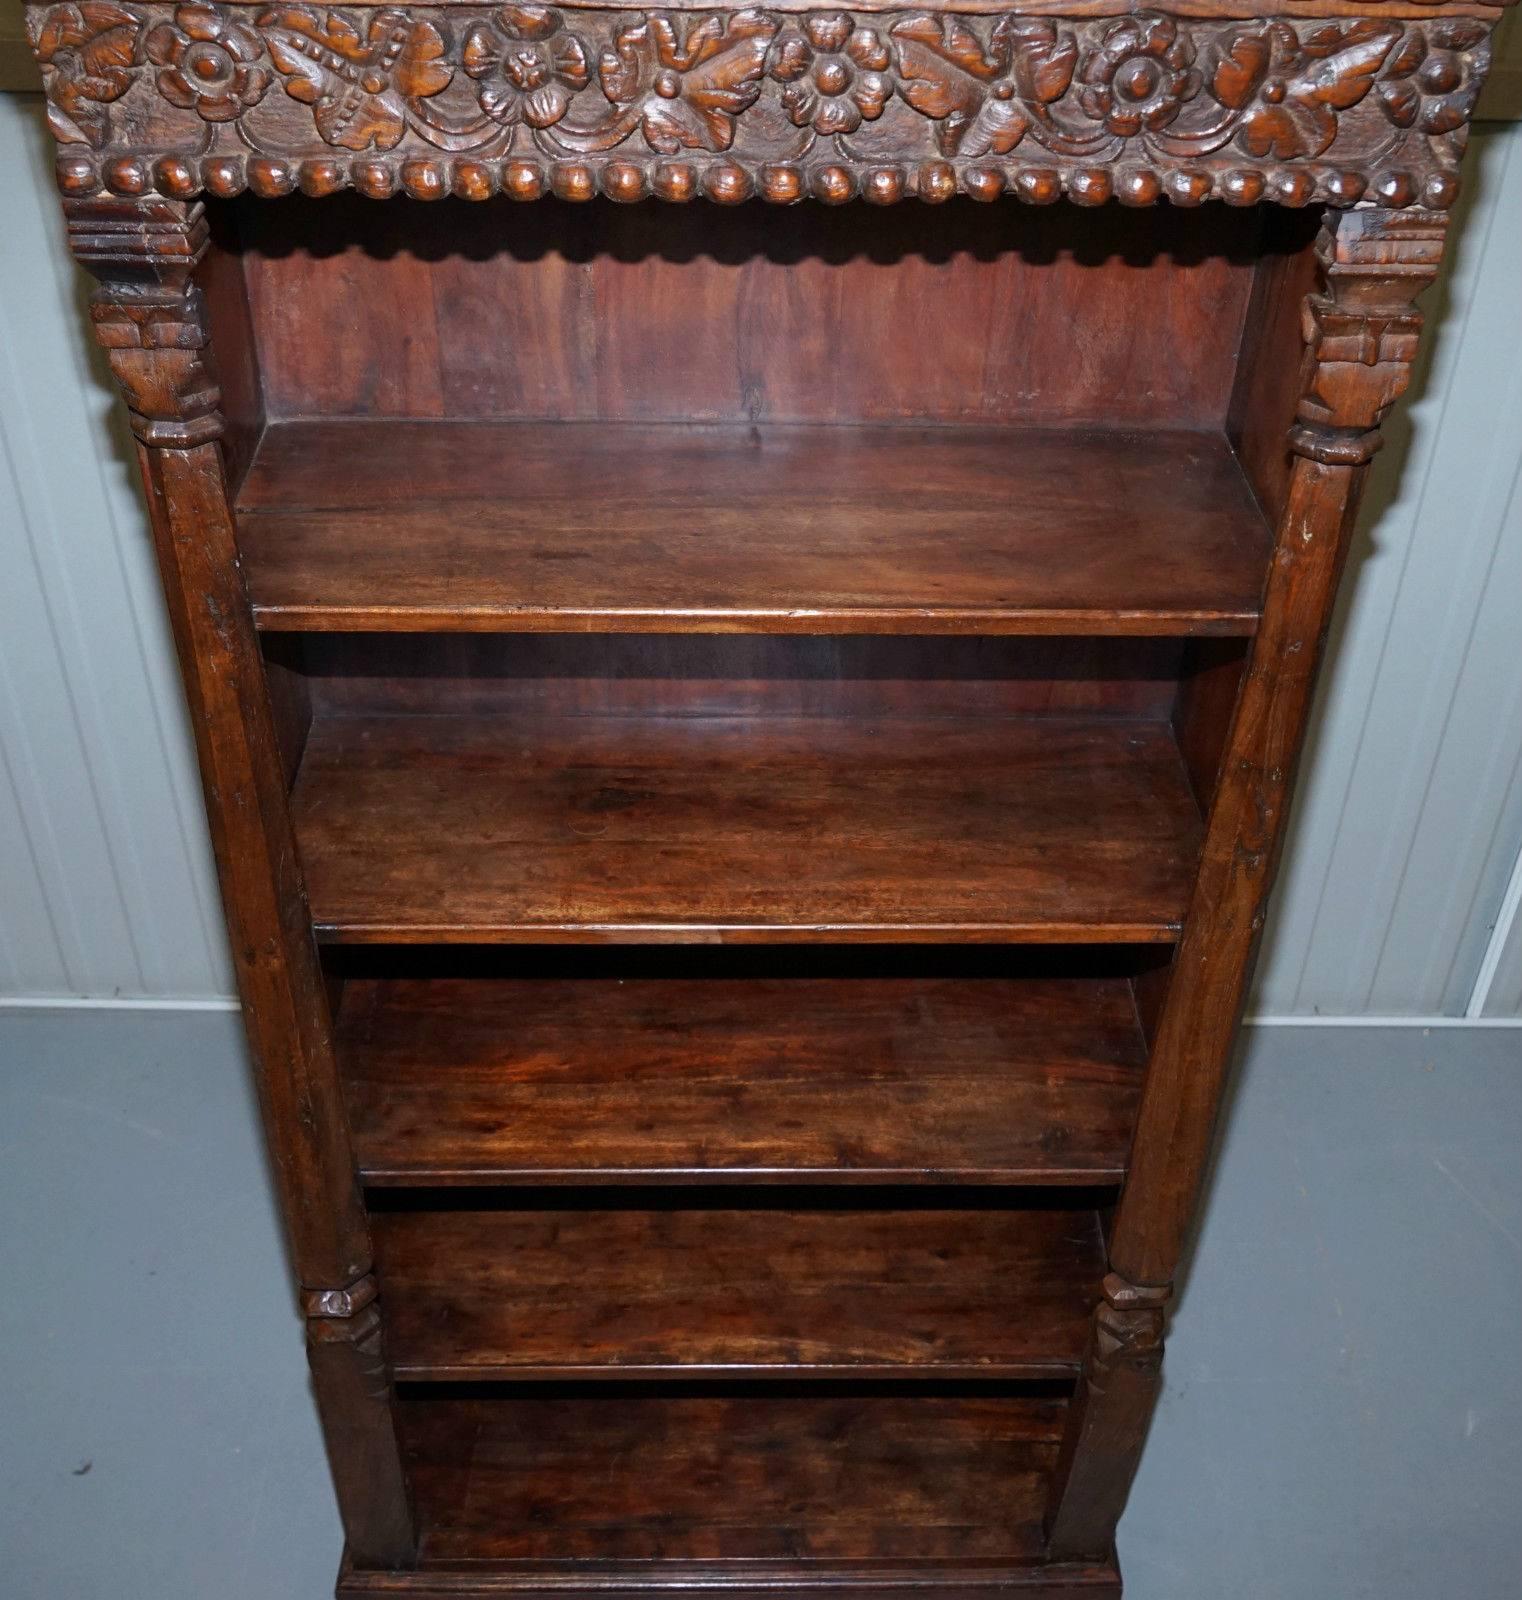 British Solid Hand-Carved Teak Wood Bookcase, Extremely Heavy and Solid Well Made Piece